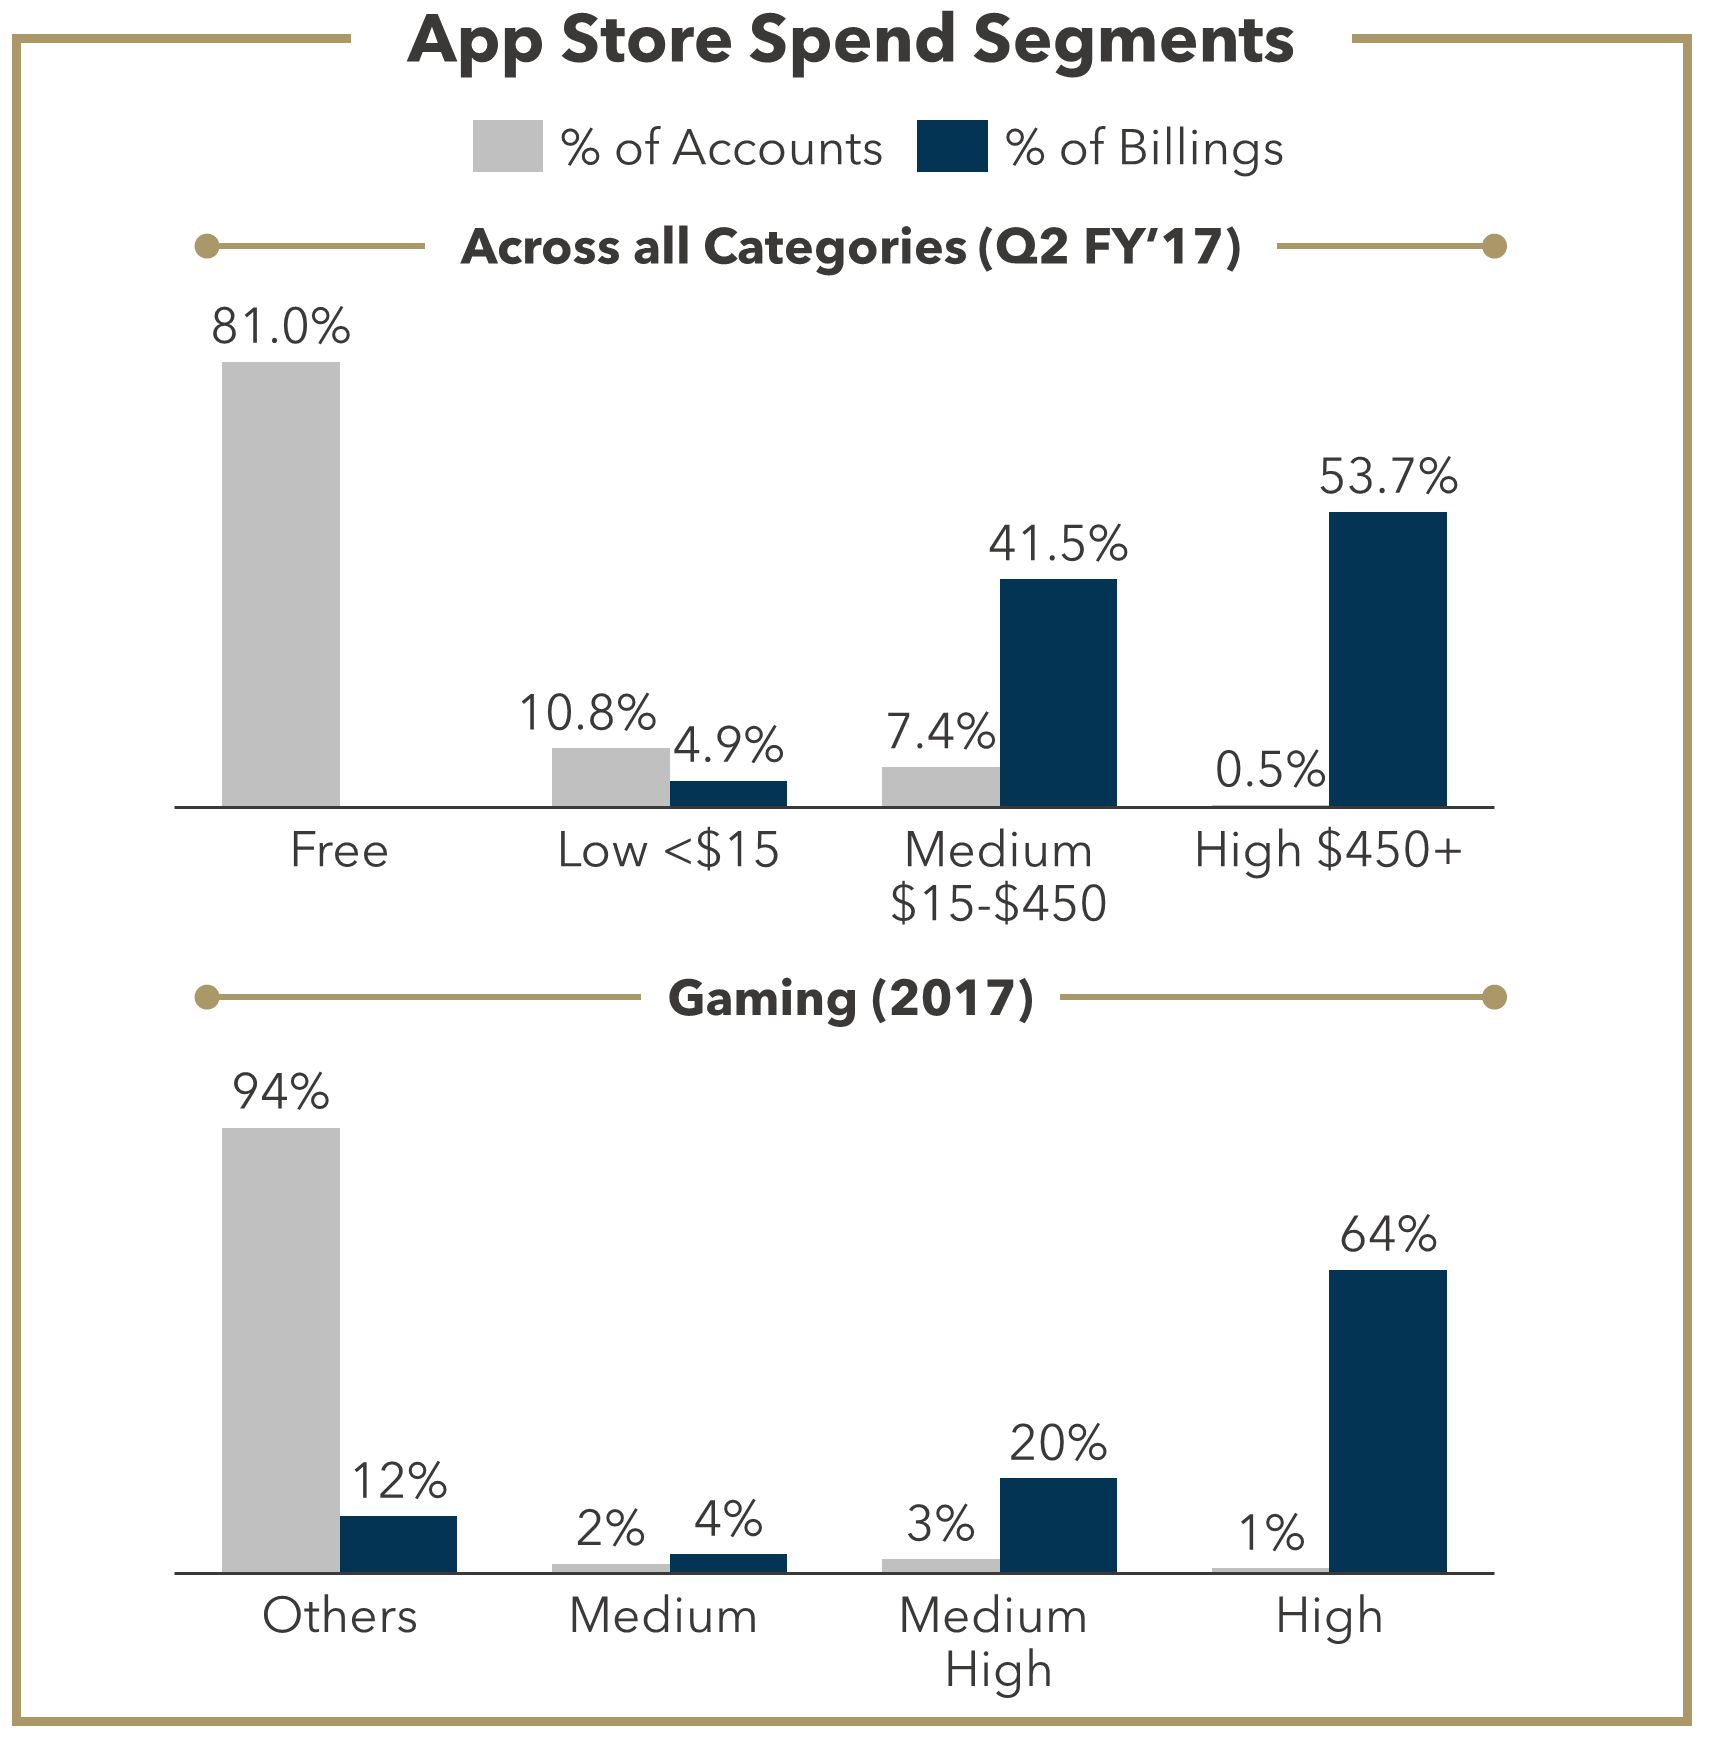 Every Apple App Store fee, explained: How much, for what, and when